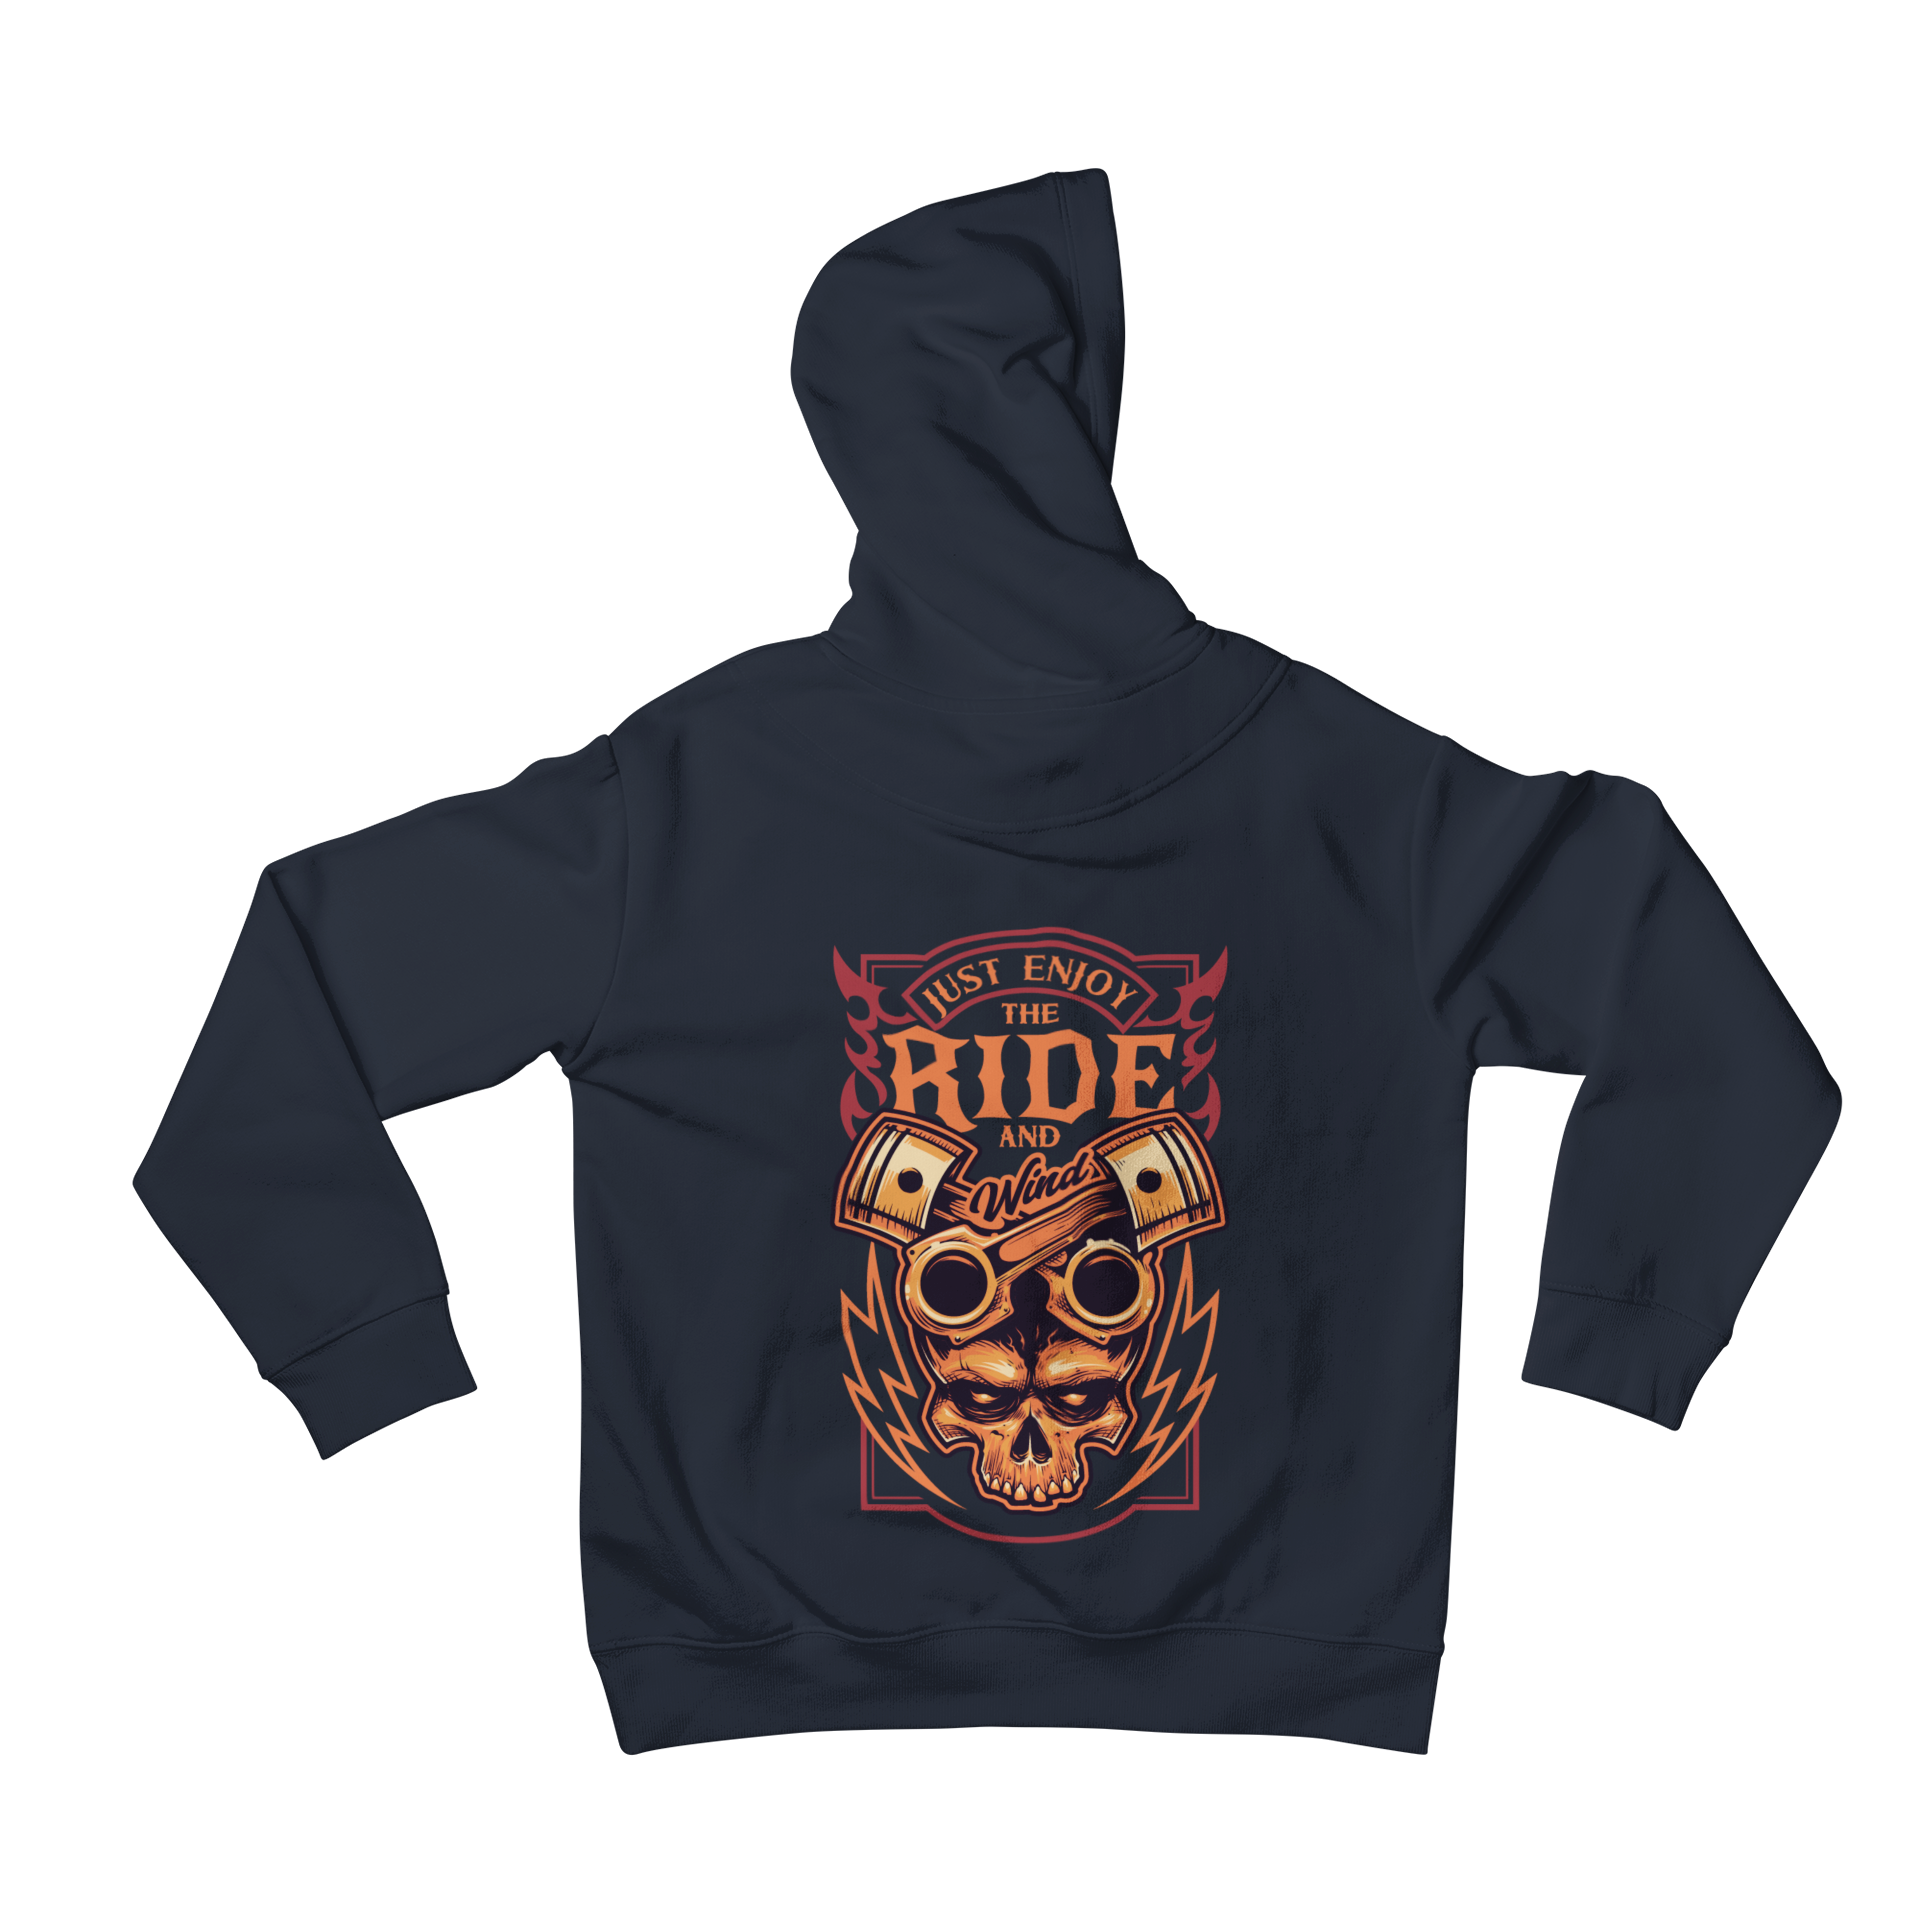 Looking for a biker hoodie with a graphic? Teevolution has got you covered! Our back print hoodie is perfect for bikers who just want to enjoy the ride. With a unique graphic design, you'll be the envy of all your biker friends. Get your Teevolution hoodie today!